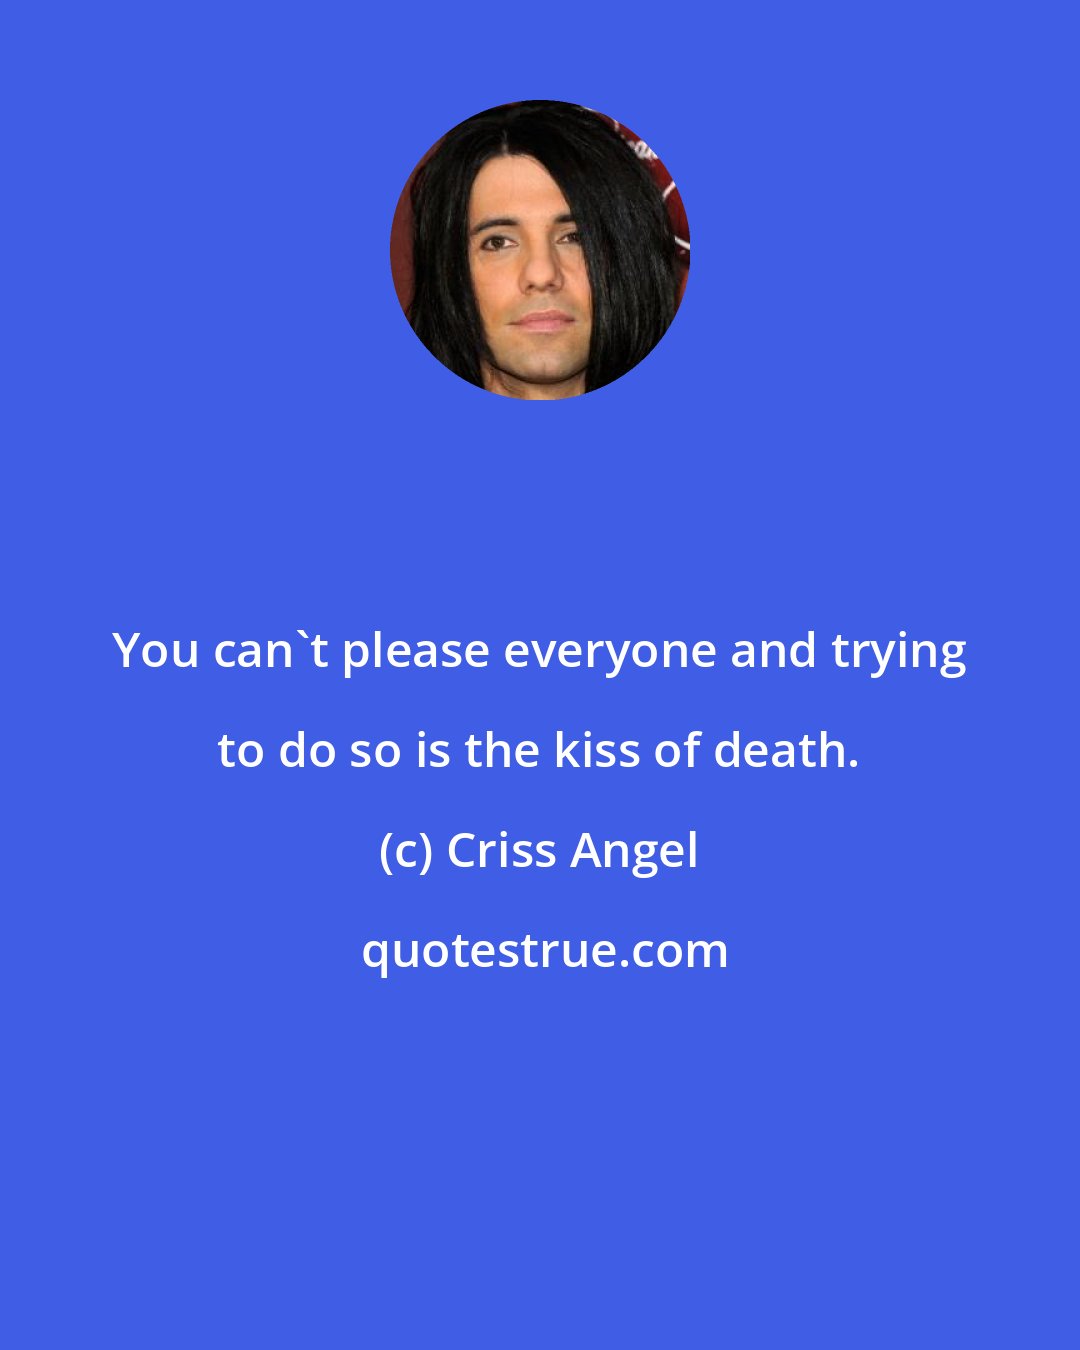 Criss Angel: You can't please everyone and trying to do so is the kiss of death.